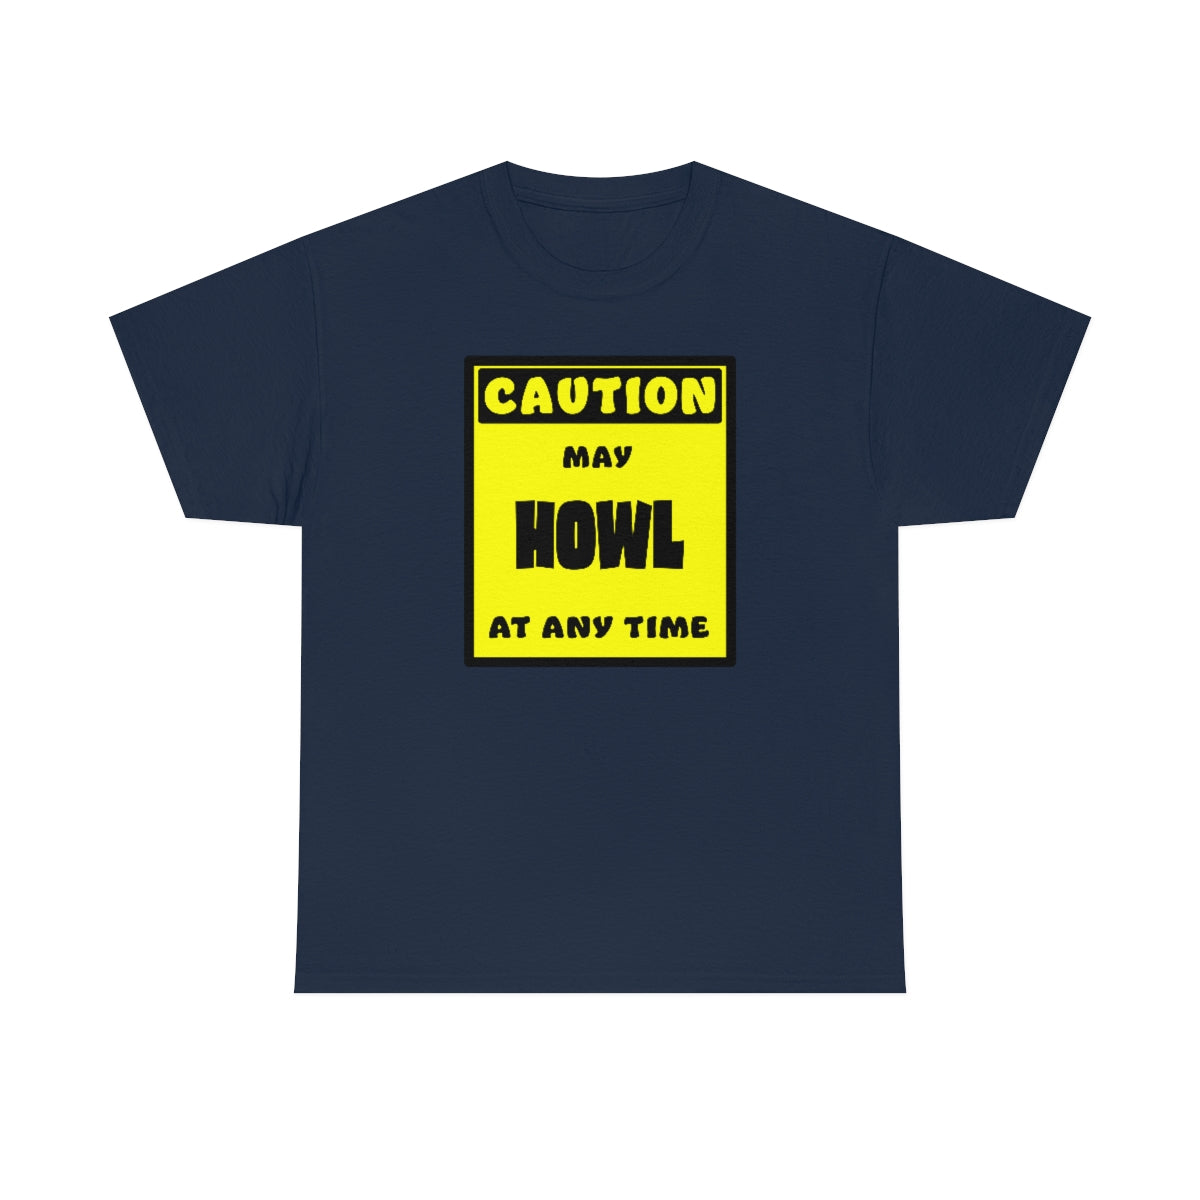 CAUTION! May HOWL at any time! - T-Shirt T-Shirt AFLT-Whootorca Navy Blue S 